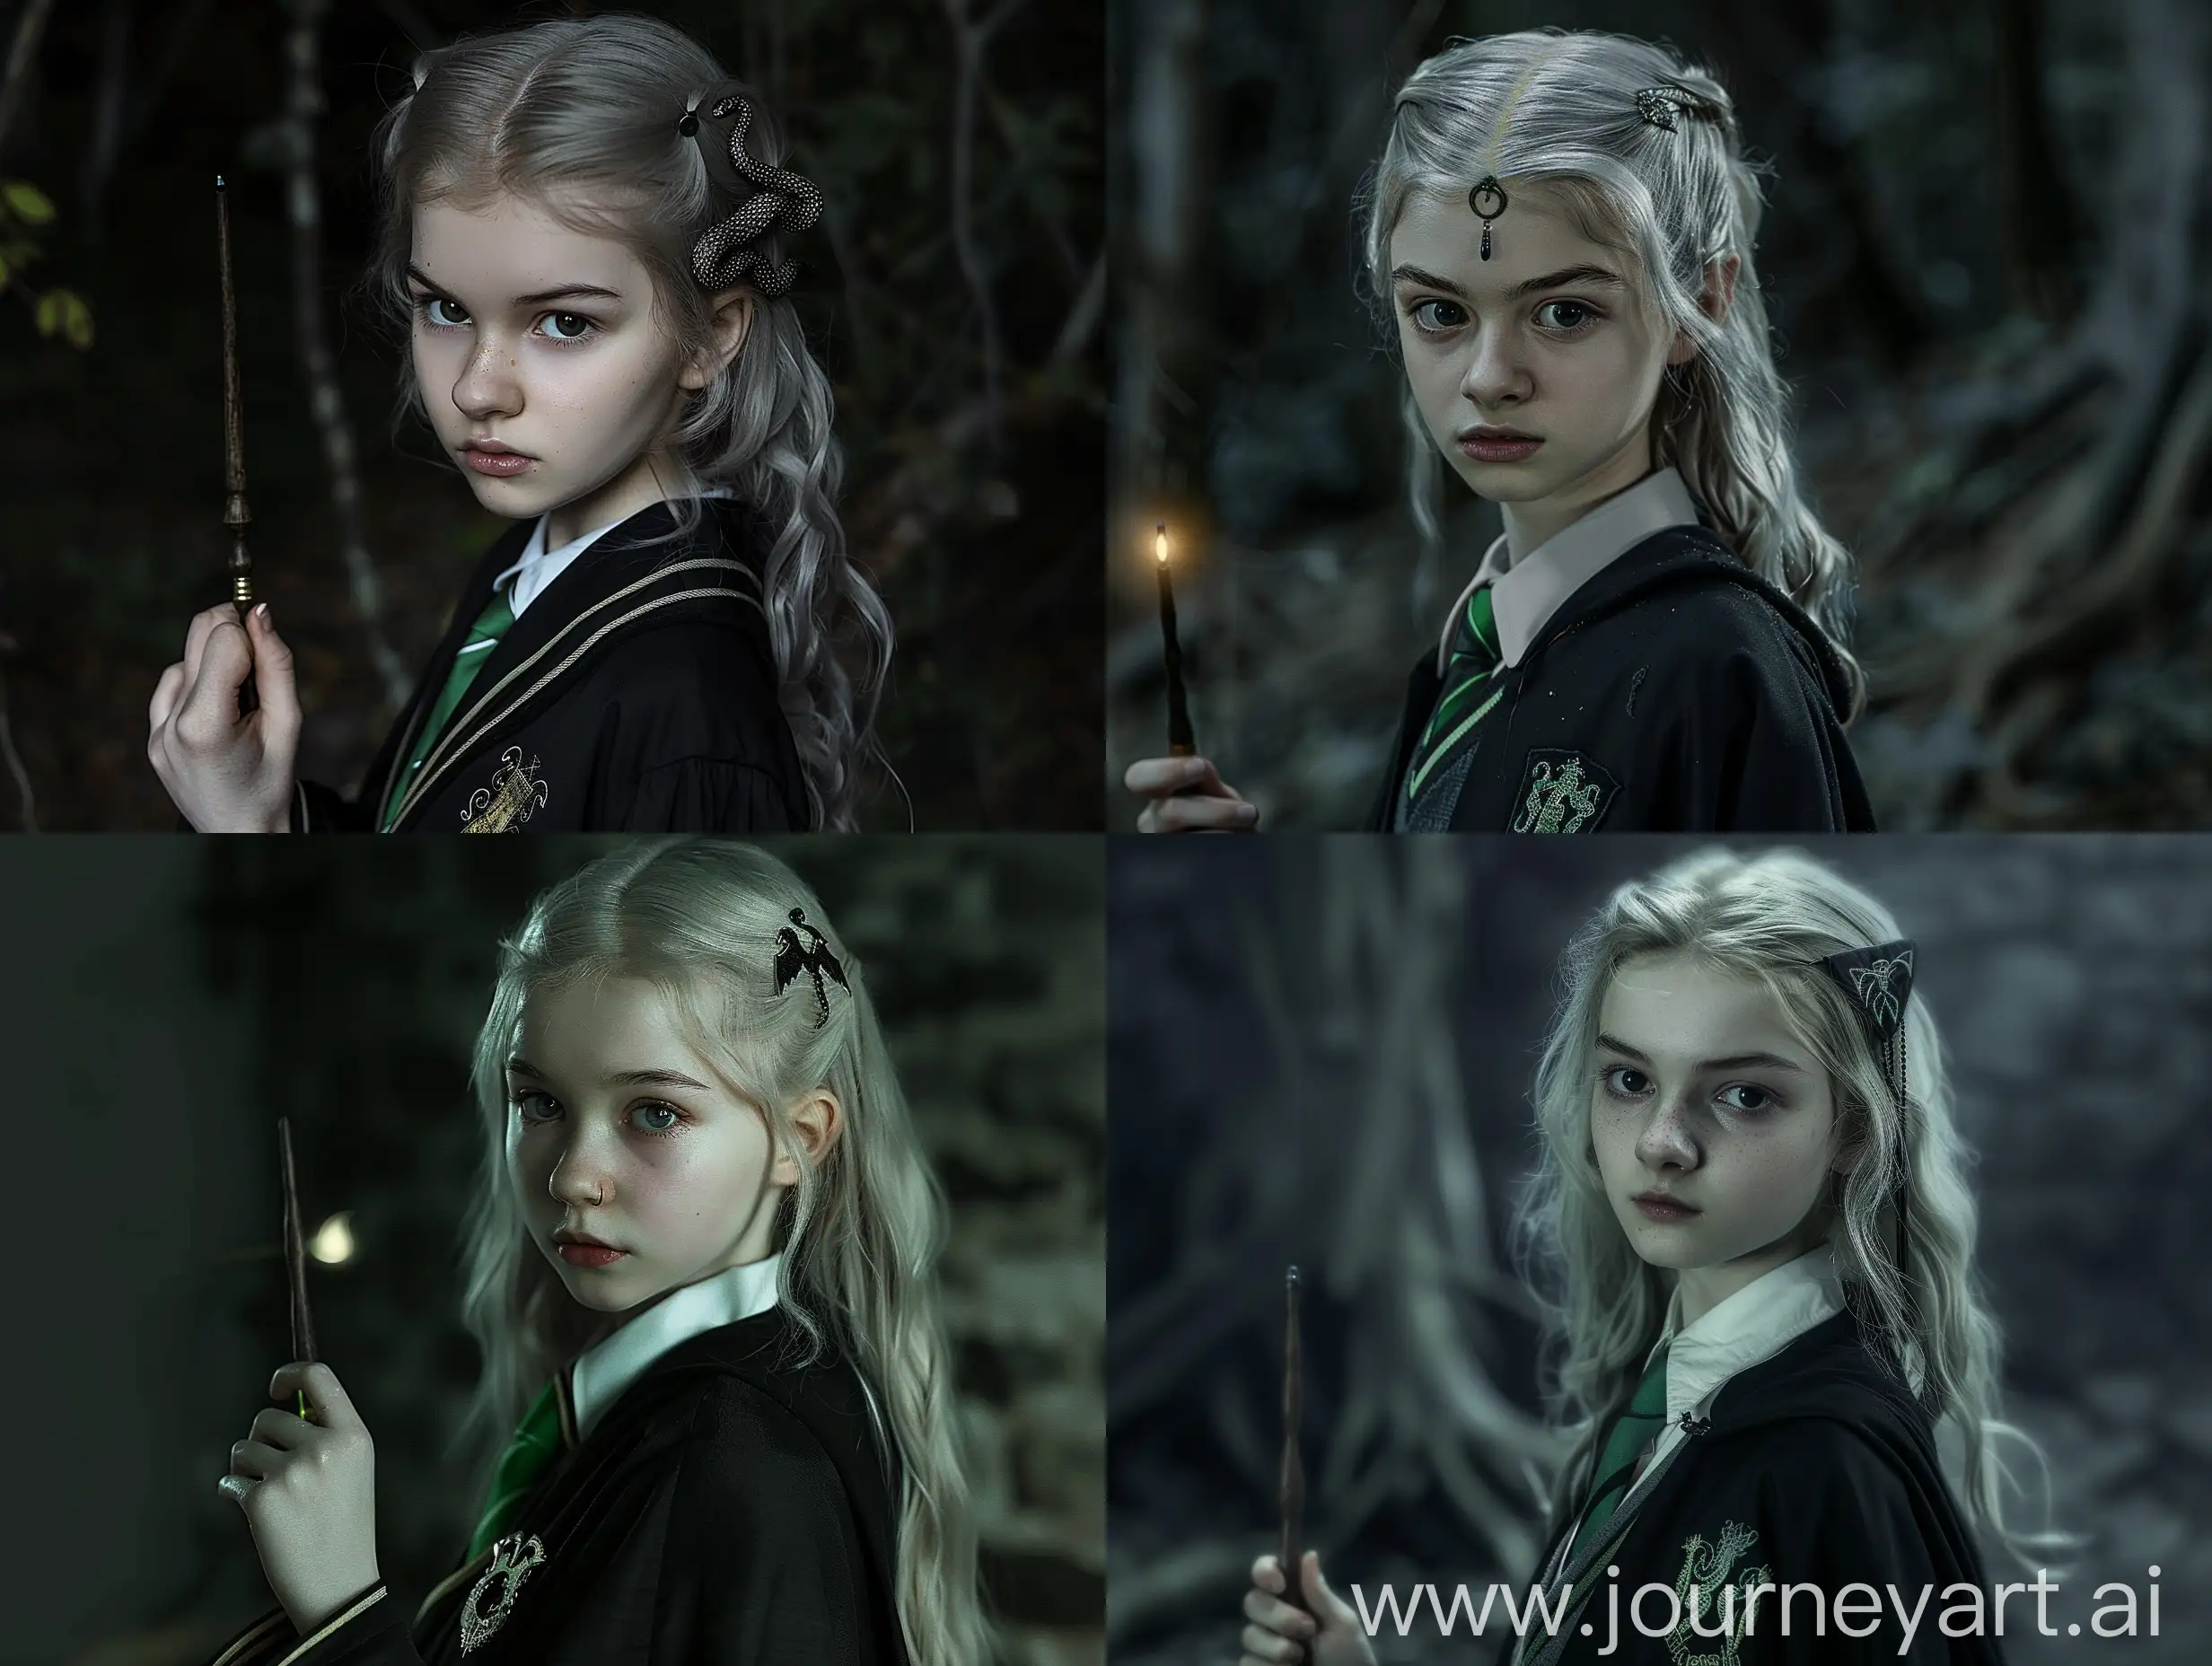 Teenage-Slytherin-Witch-in-Forbidden-Forest-Moonlight-with-Lumos-Spell